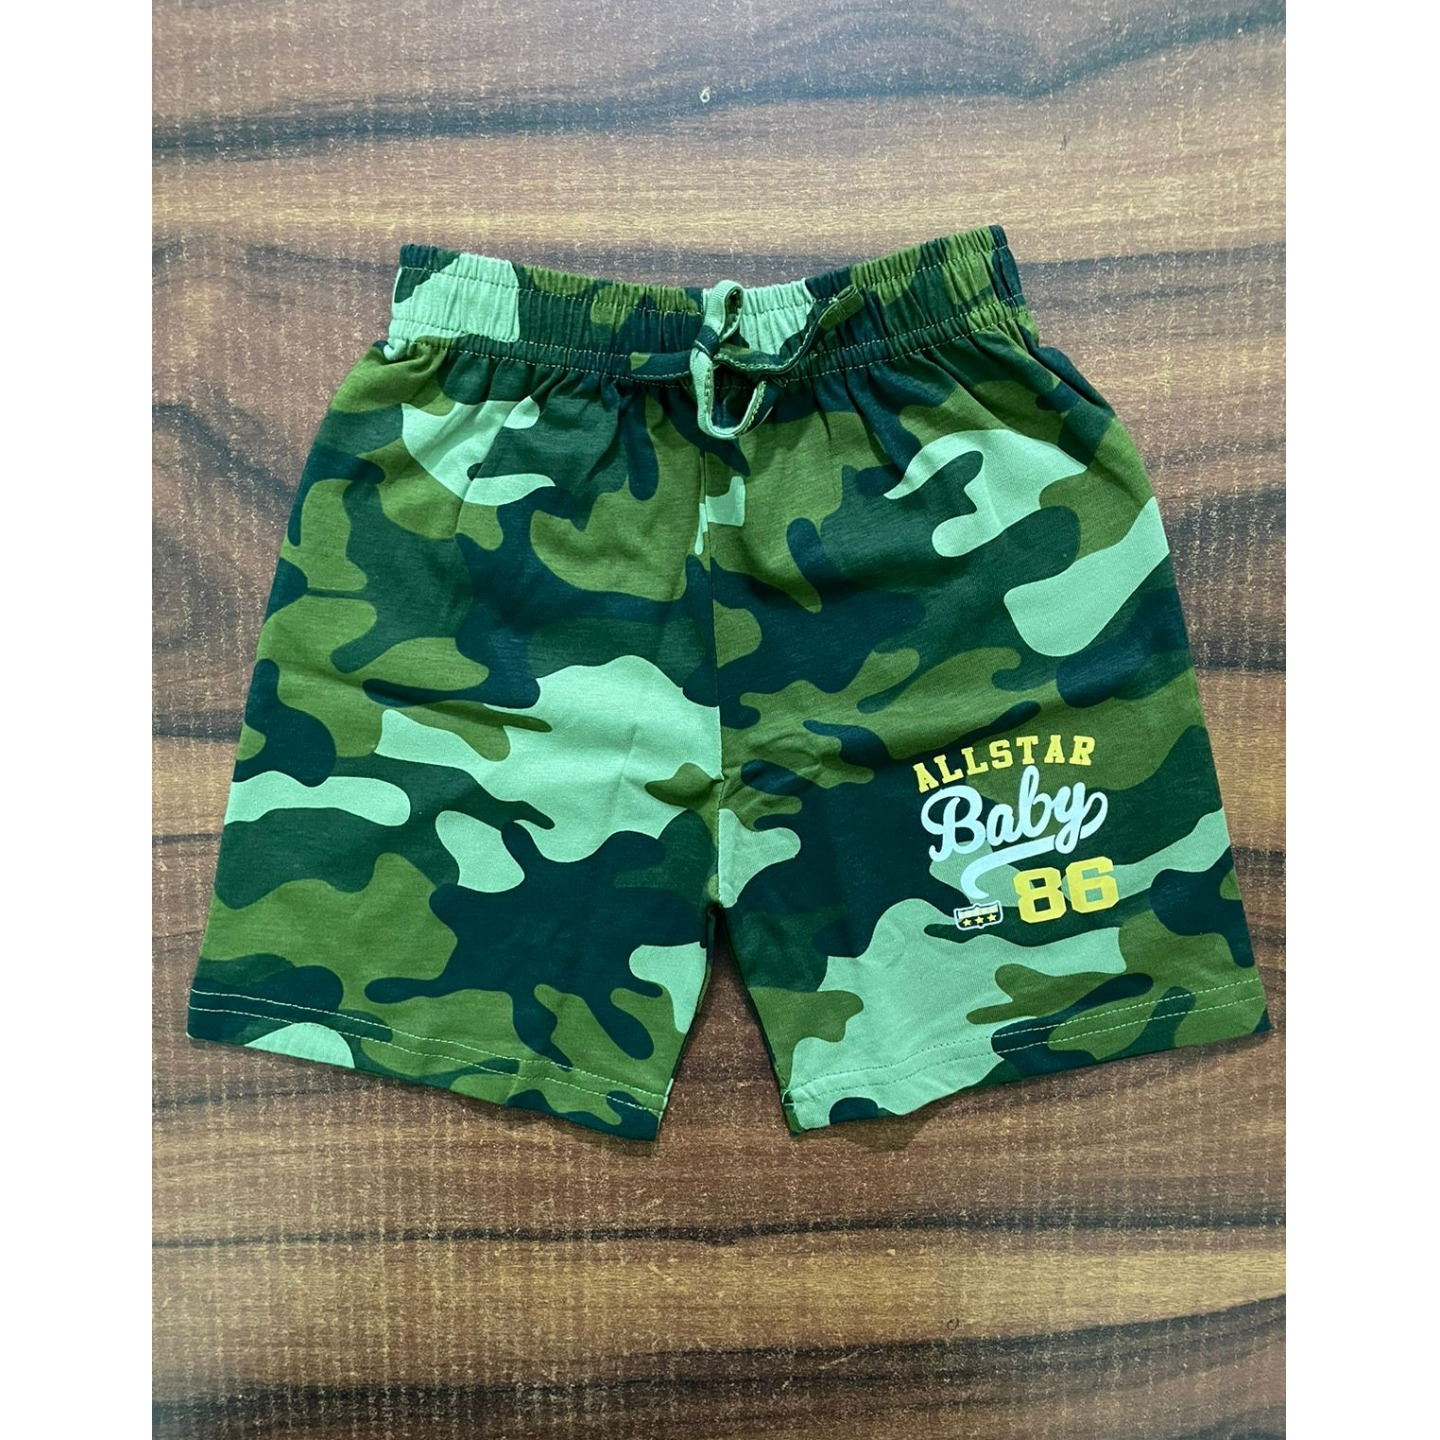 Cucumber NikarShorts Rs 179 Only Made In India 4 to 7 Years